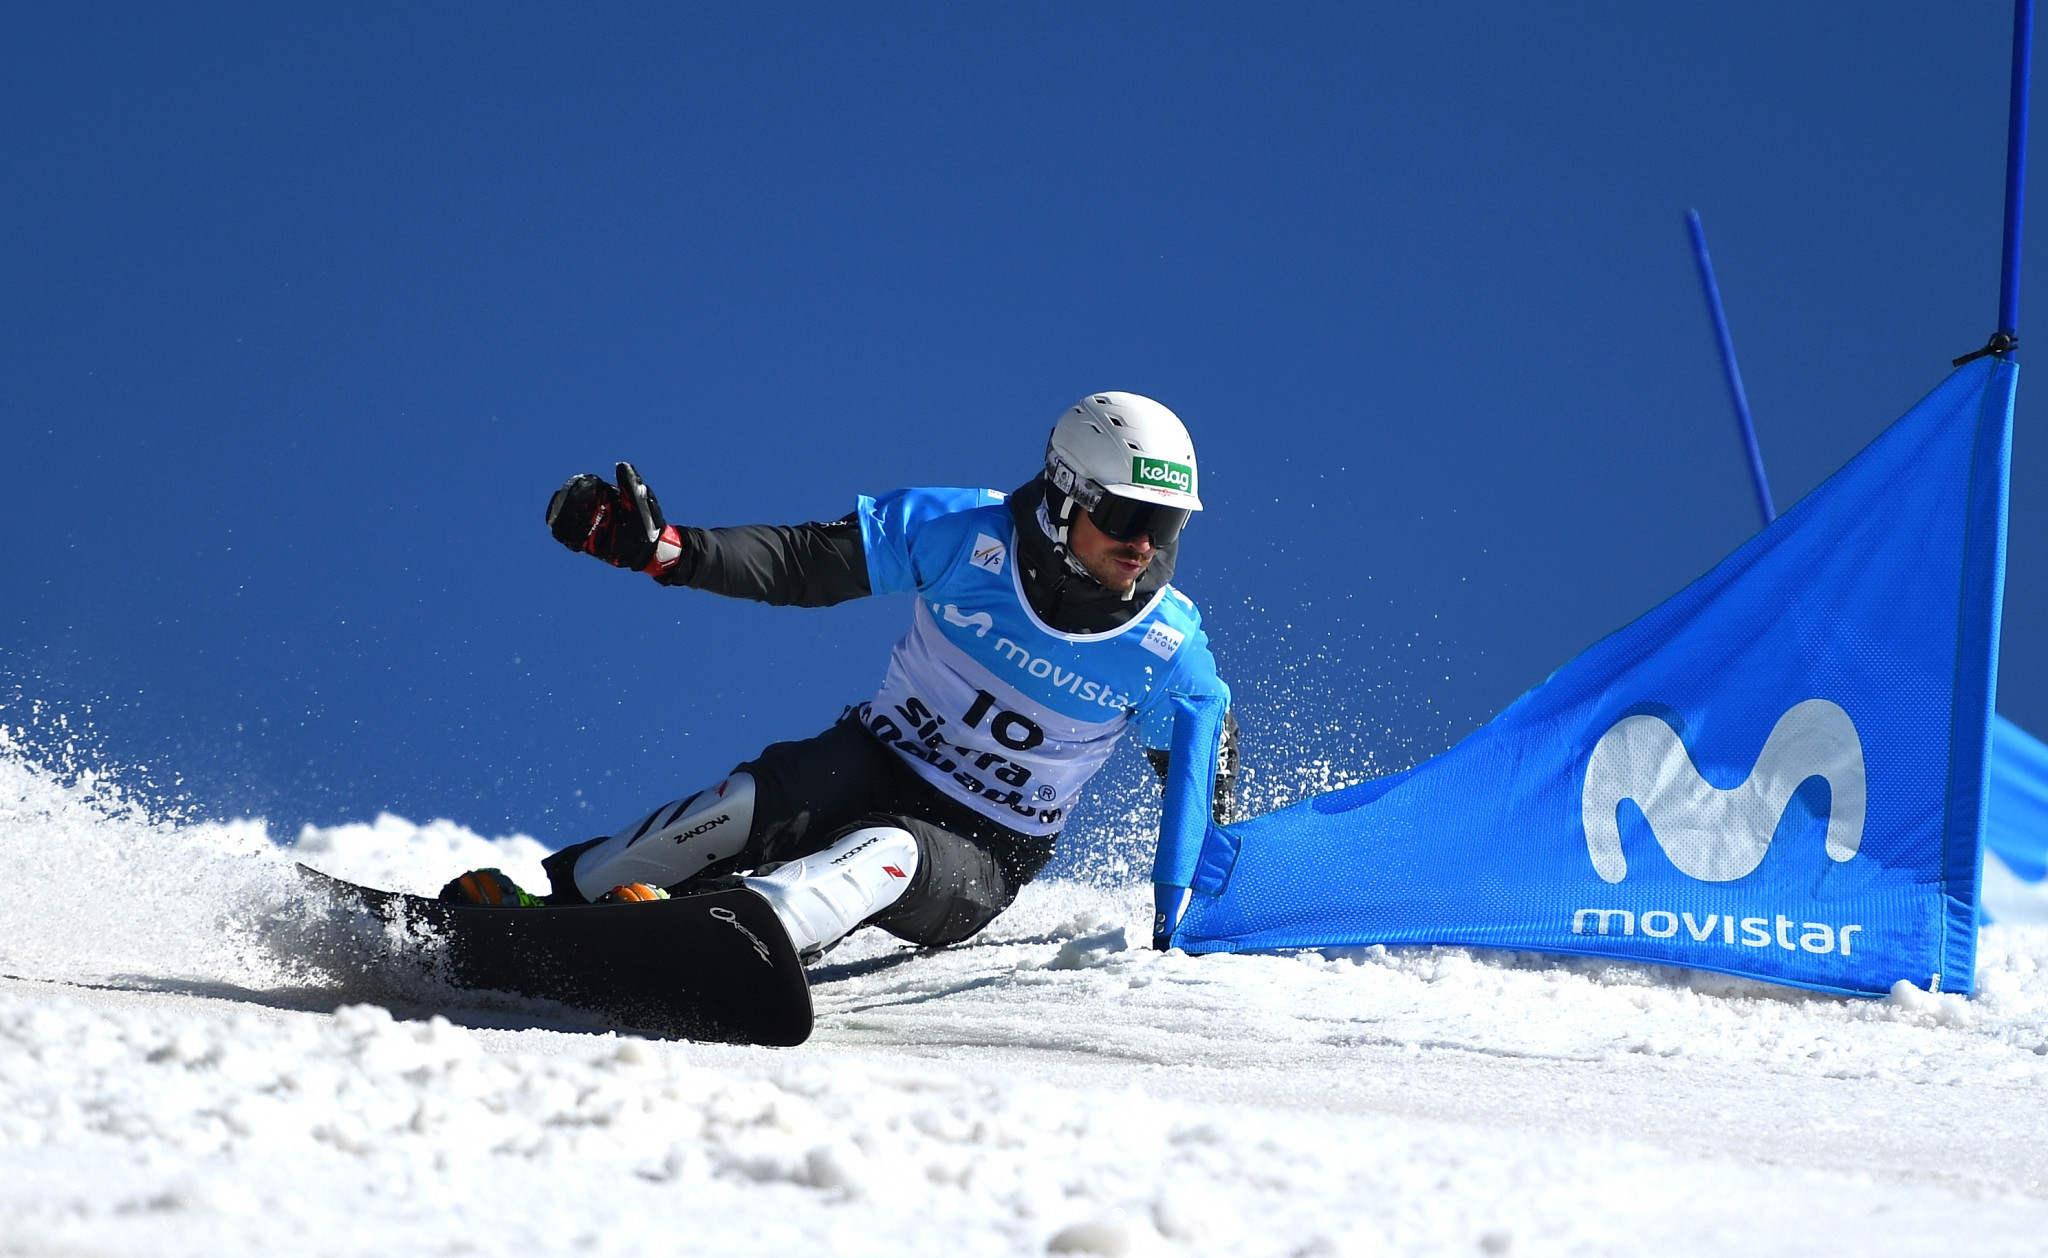 Alexander Payer won the men's event in Italy ©Getty Images